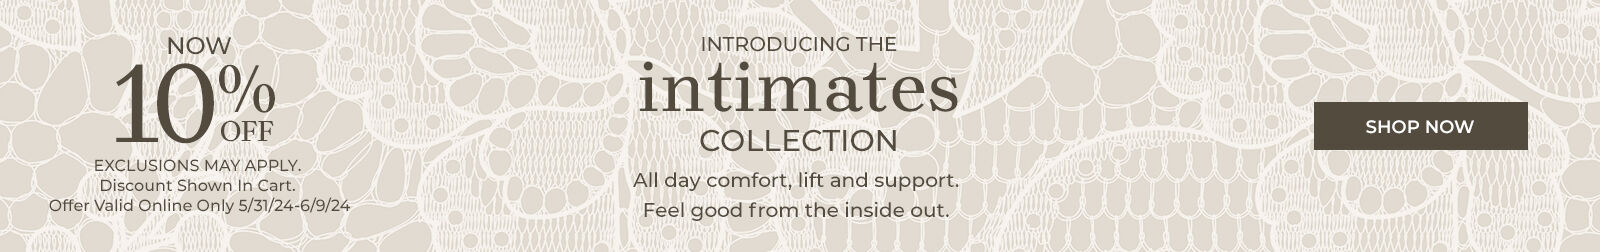 introducing the intimates collection all day comfort, lift and support. feel good from the inside out. now 10% off exclusions may apply discount shown in cart. offer valid online only 5/31/24 - 6/9/24